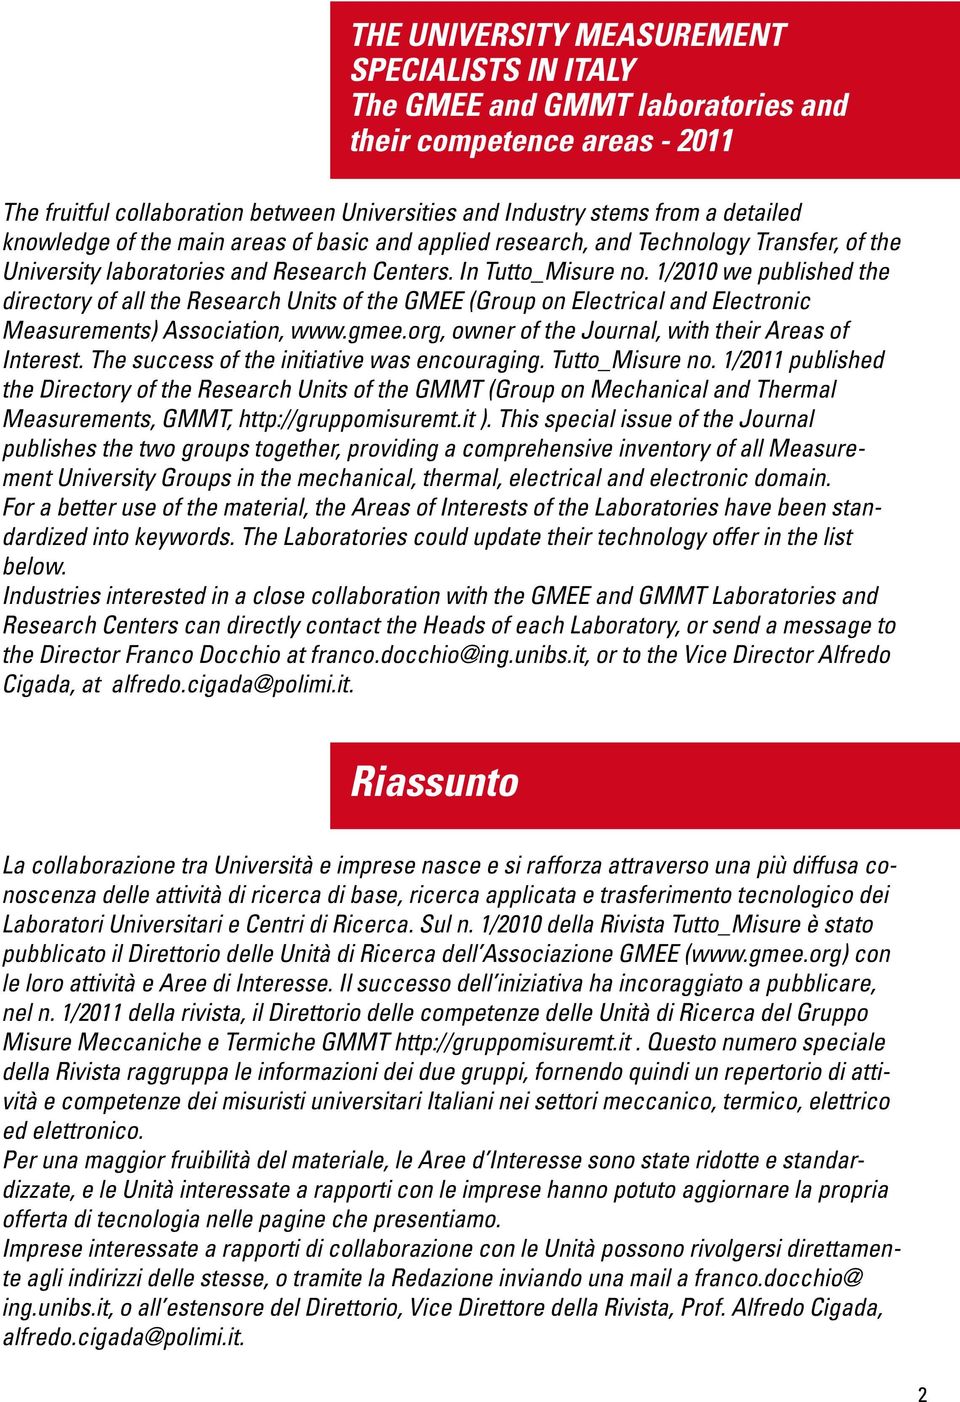 1/2010 we published the directory of all the Research Units of the GMEE (Group on Electrical and Electronic Measurements) Association, www.gmee.org, owner of the Journal, with their Areas of Interest.